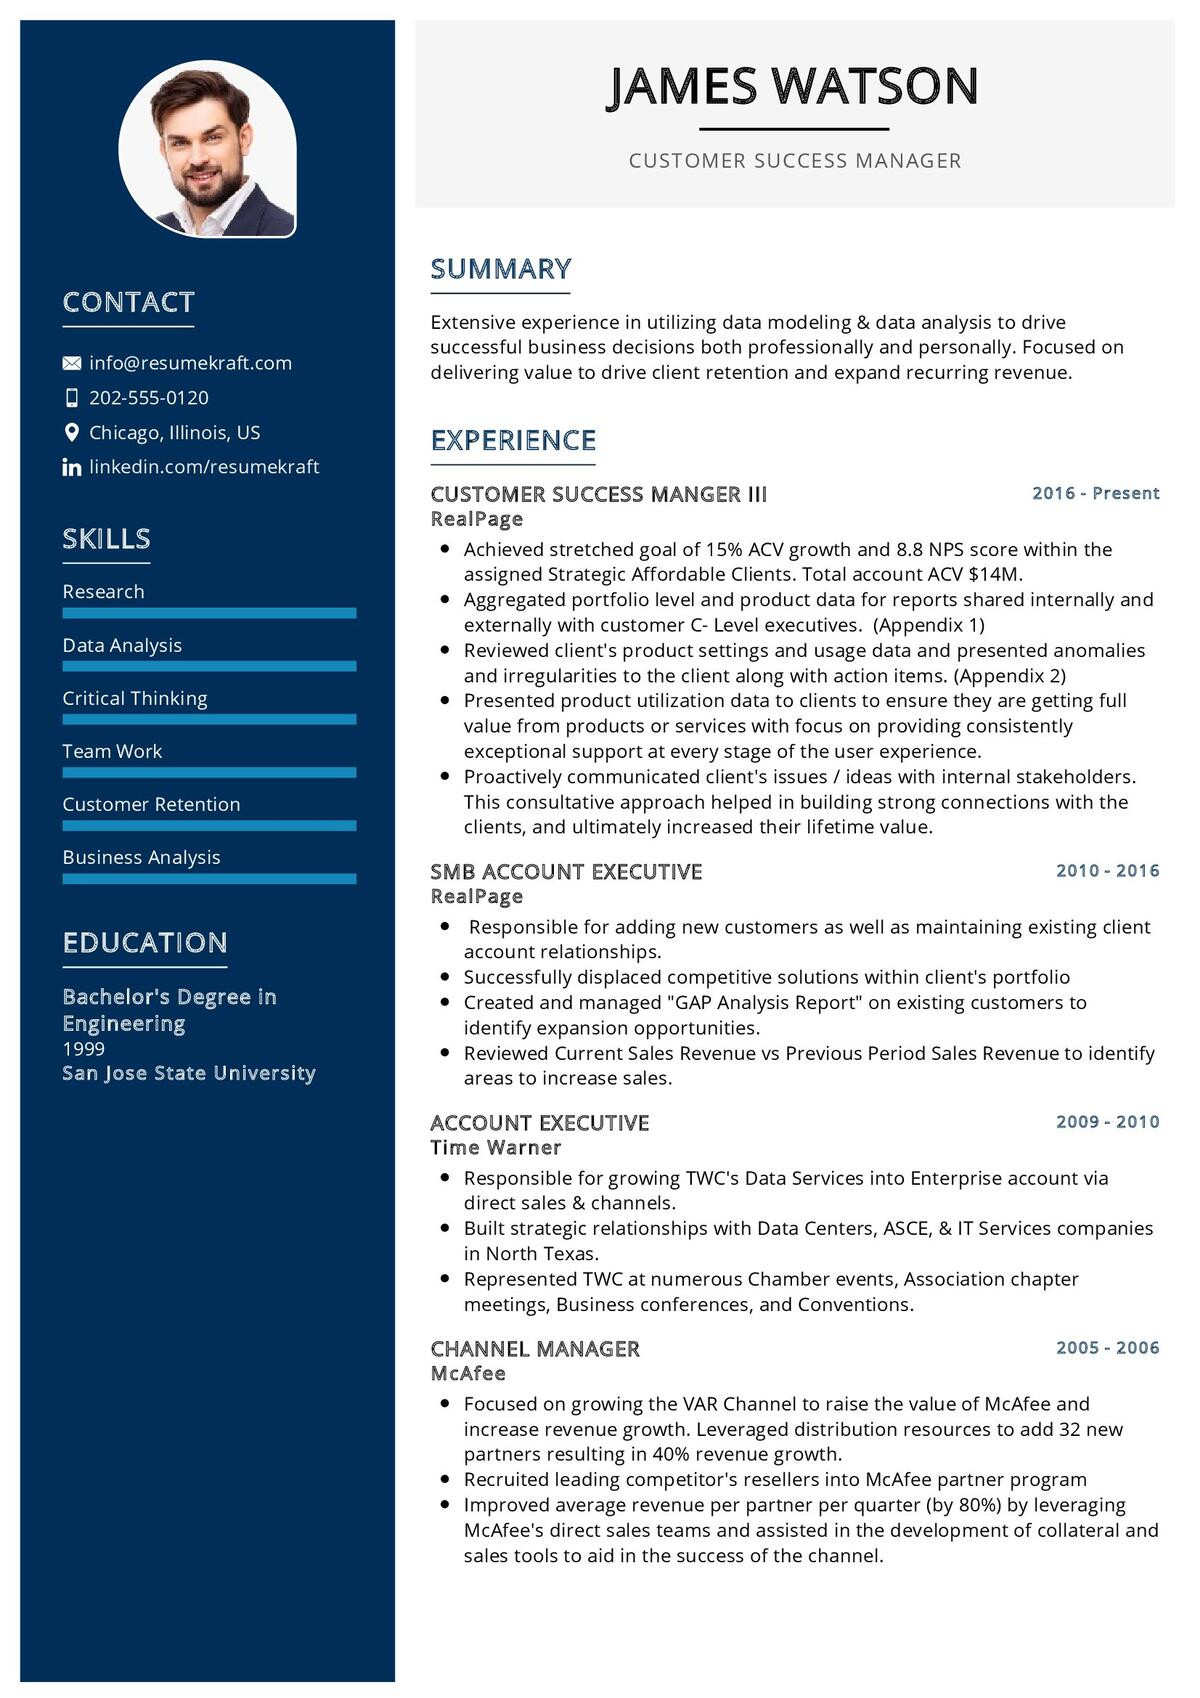 Sample Resume for Customer Success Manager Google Customer Success Manager Resume 2021 Writing Tips – Resumekraft